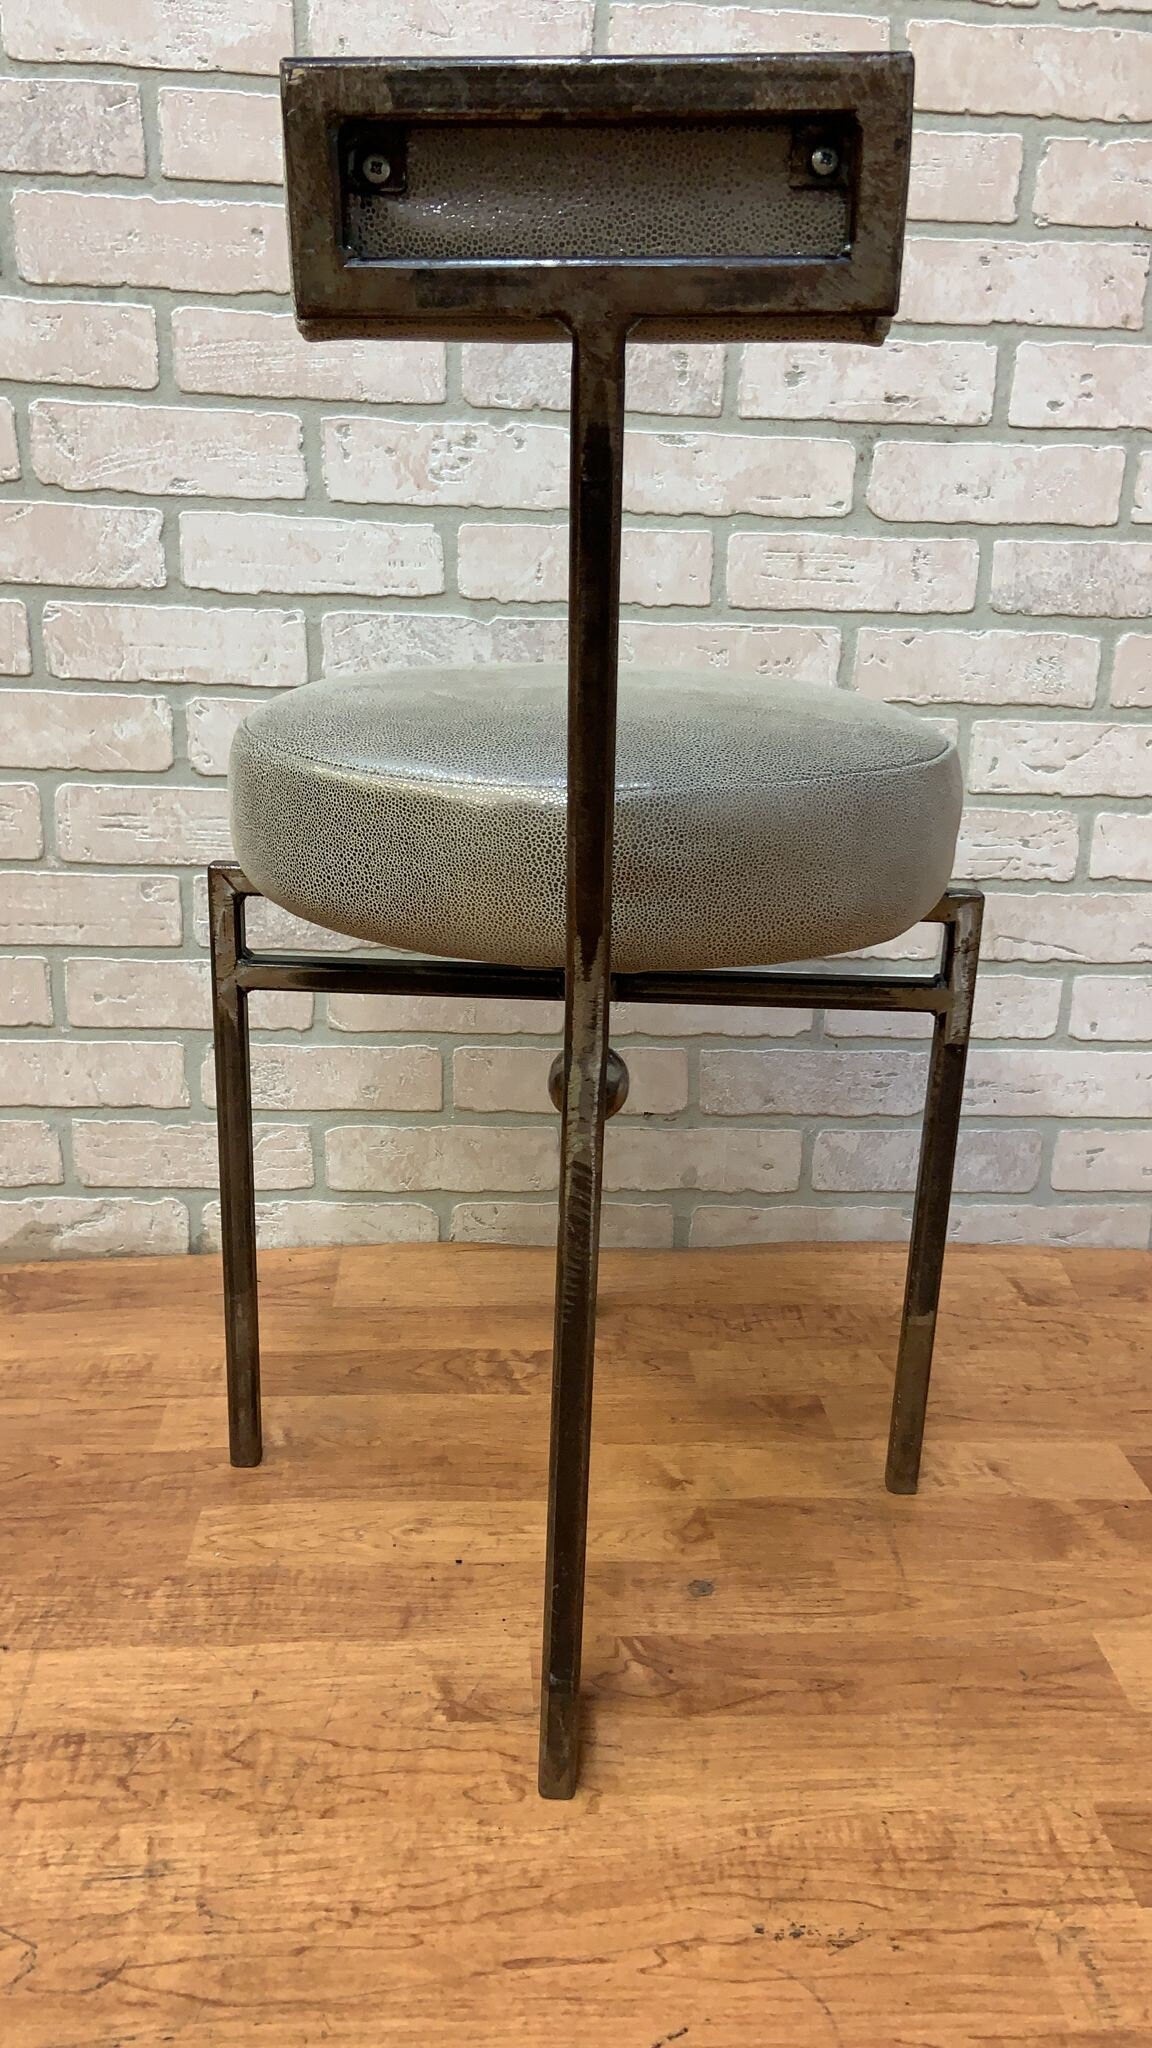 Vintage Modernist Hand Forged Iron Accent Chair Newly Upholstered in Holly Hunt Dewpoint Leather